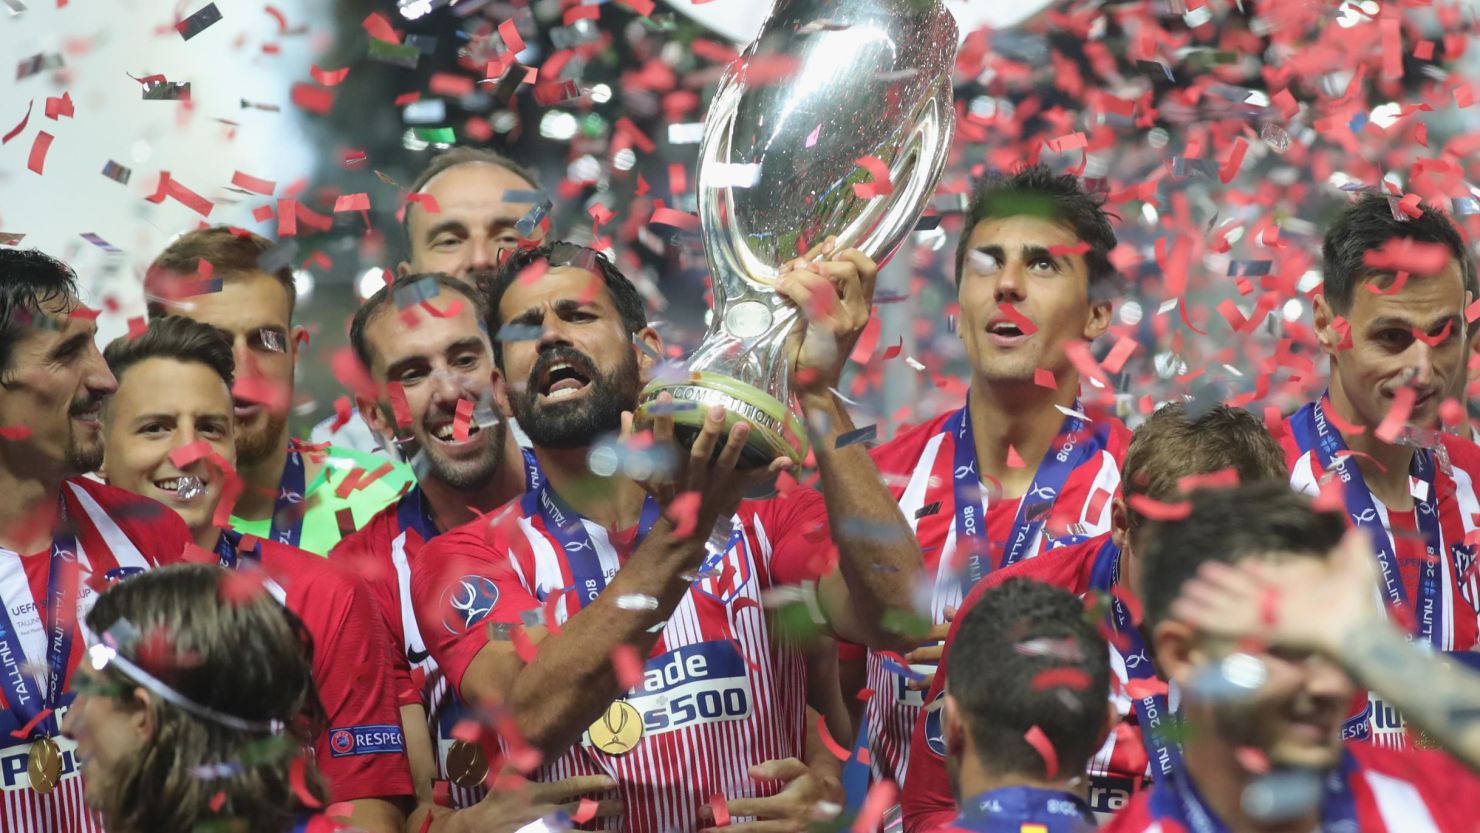 Diego Costa of Atletico Madrid celebrates with the trophy following his team's UEFA Super Cup victory over Real Madrid.